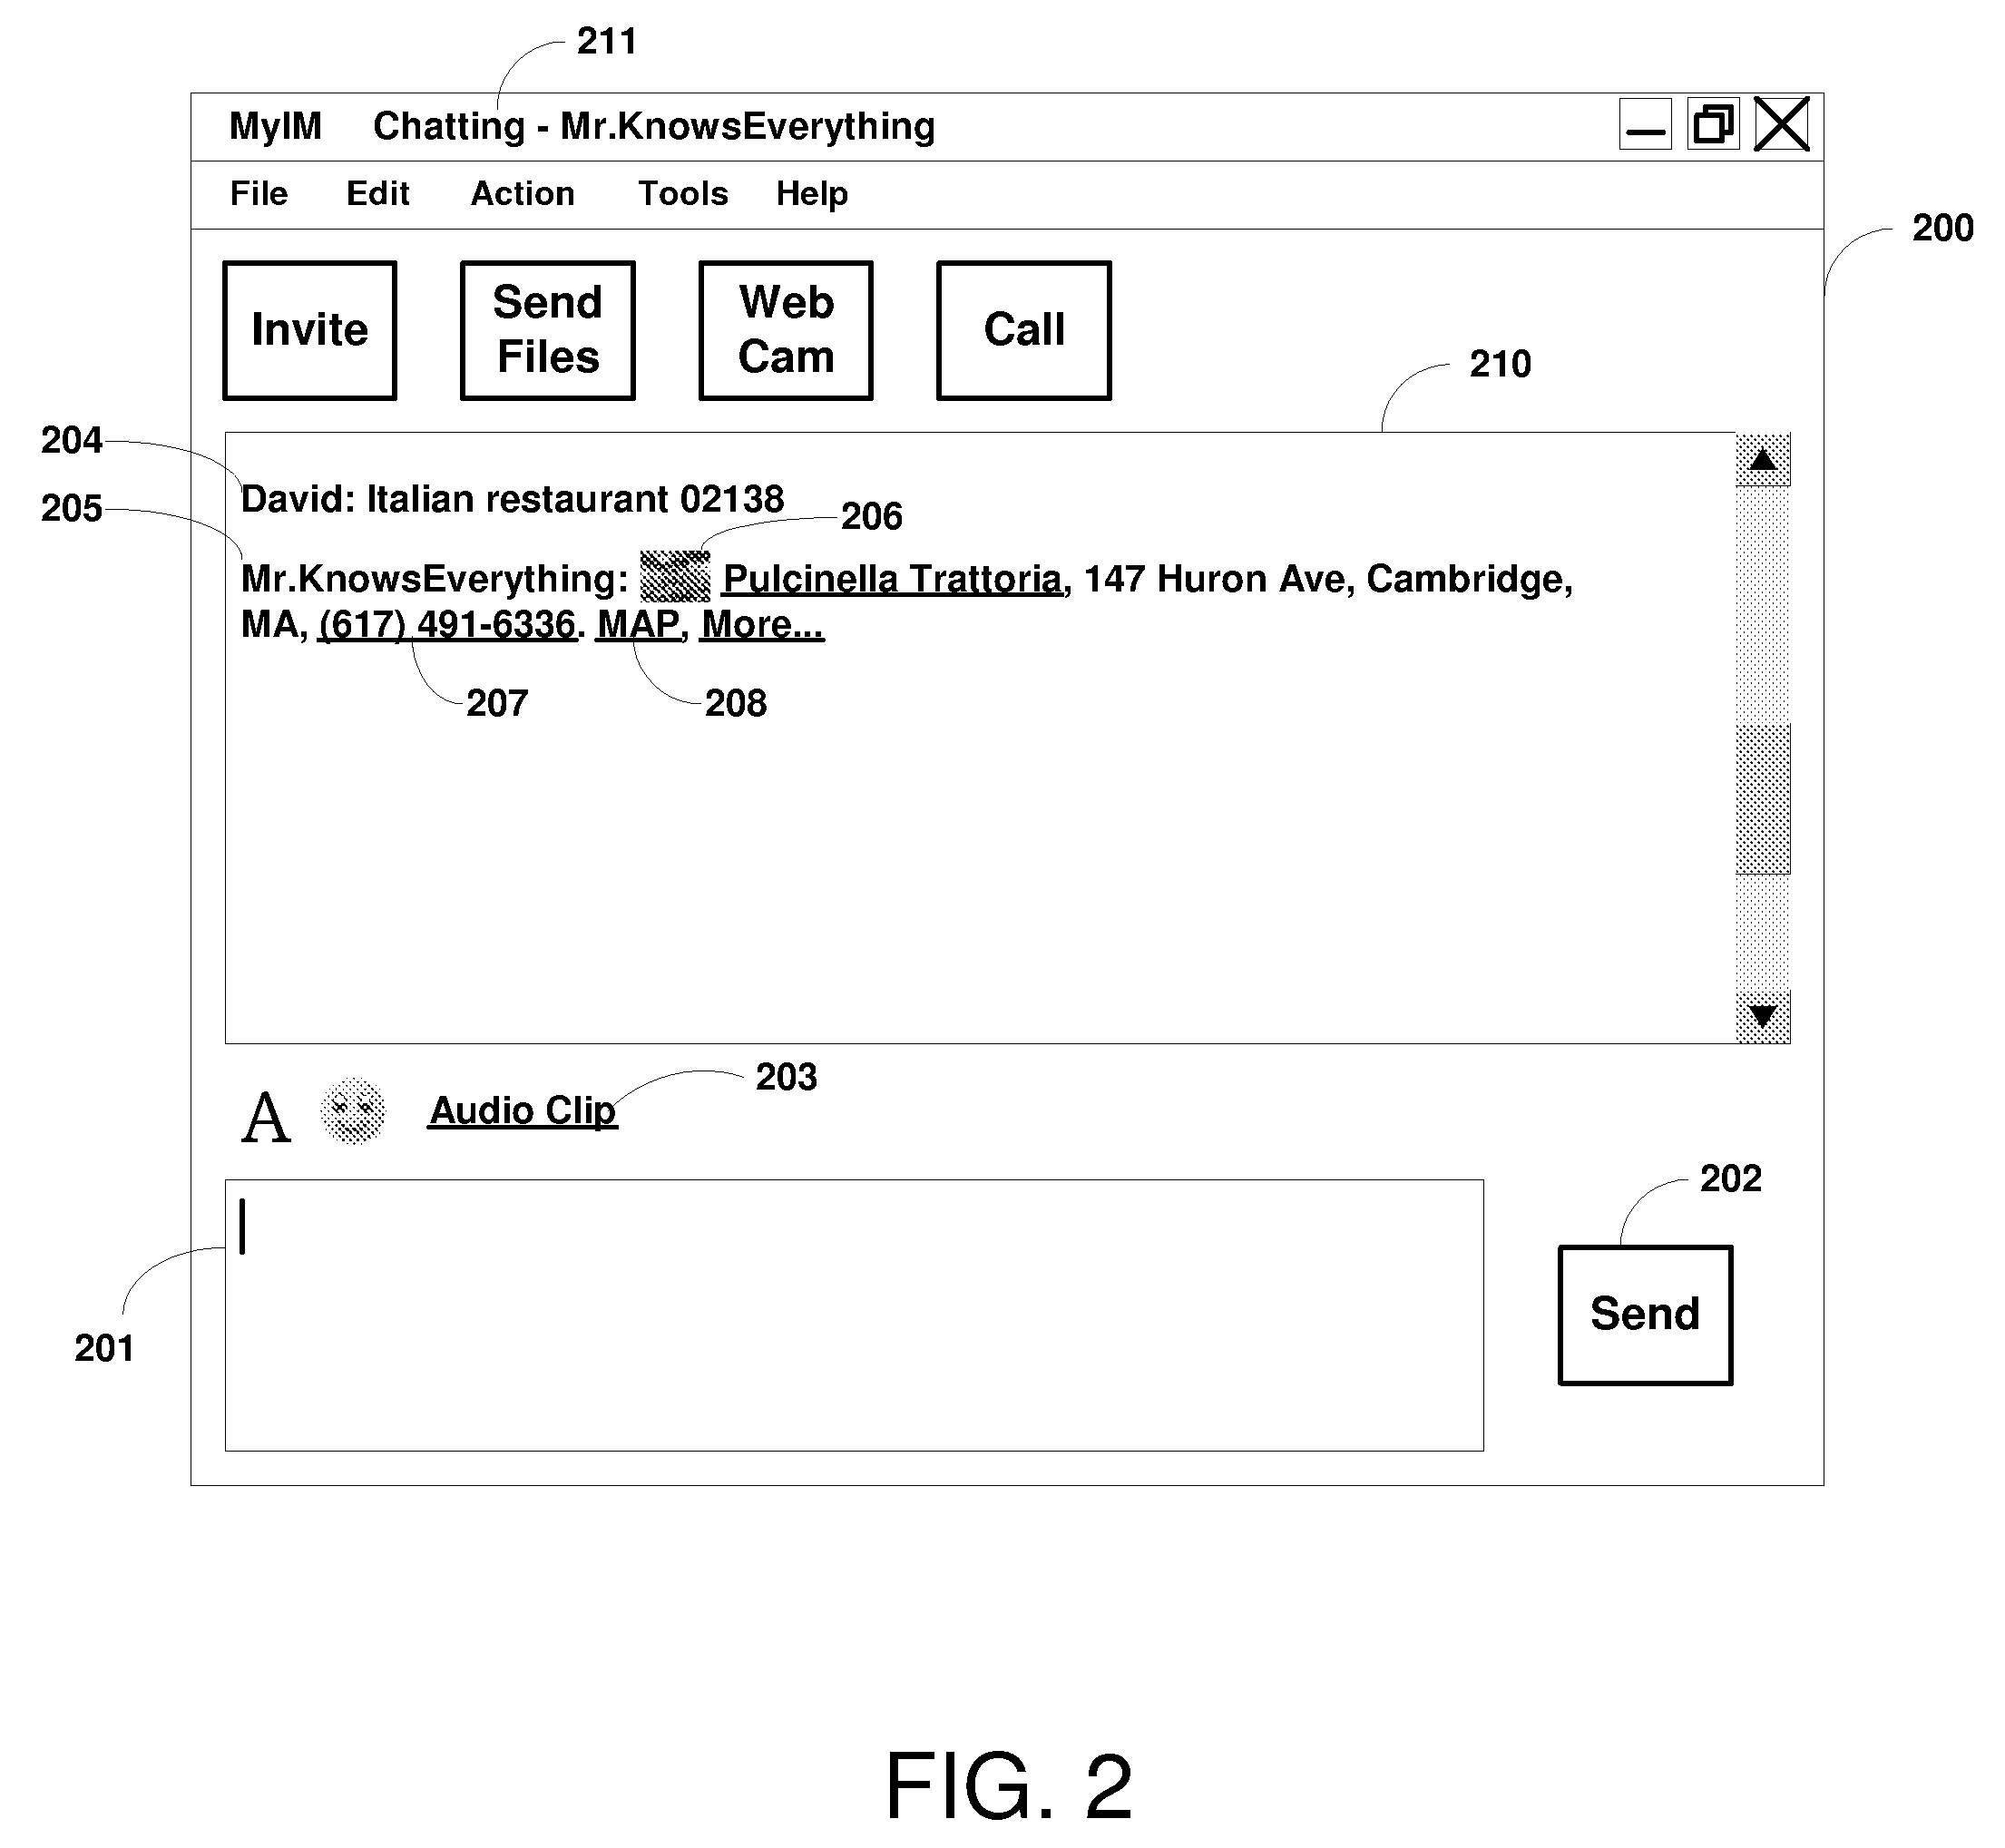 Framework and Method of Using Instant Messaging (IM) as a Search Platform